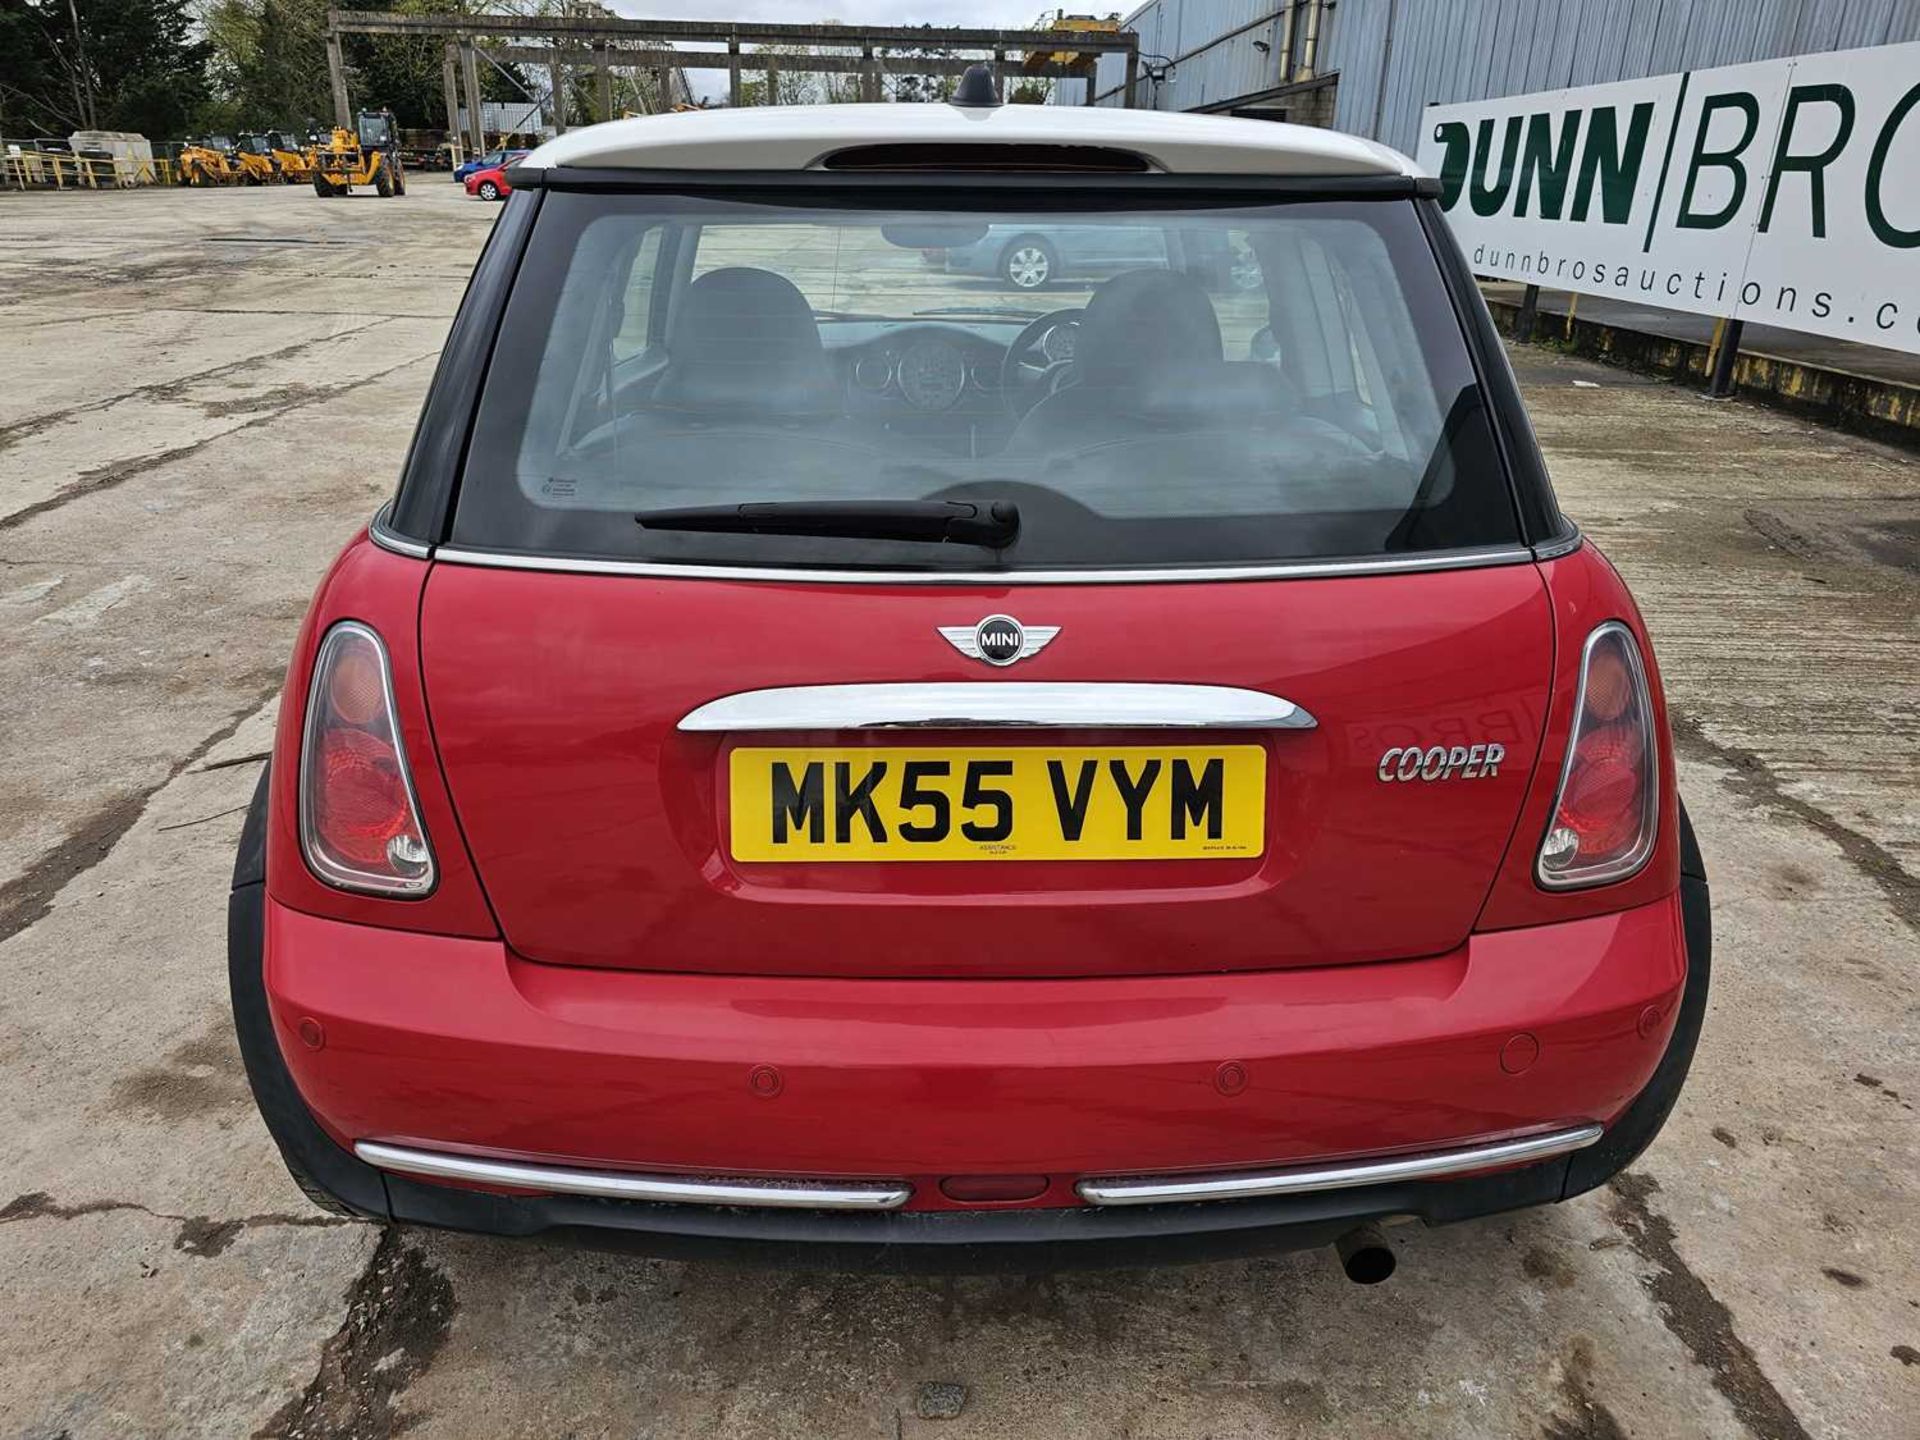 2005 Mini One, 5 Speed, Full Leather, A/C (Reg. Docs. Available) - Image 4 of 26